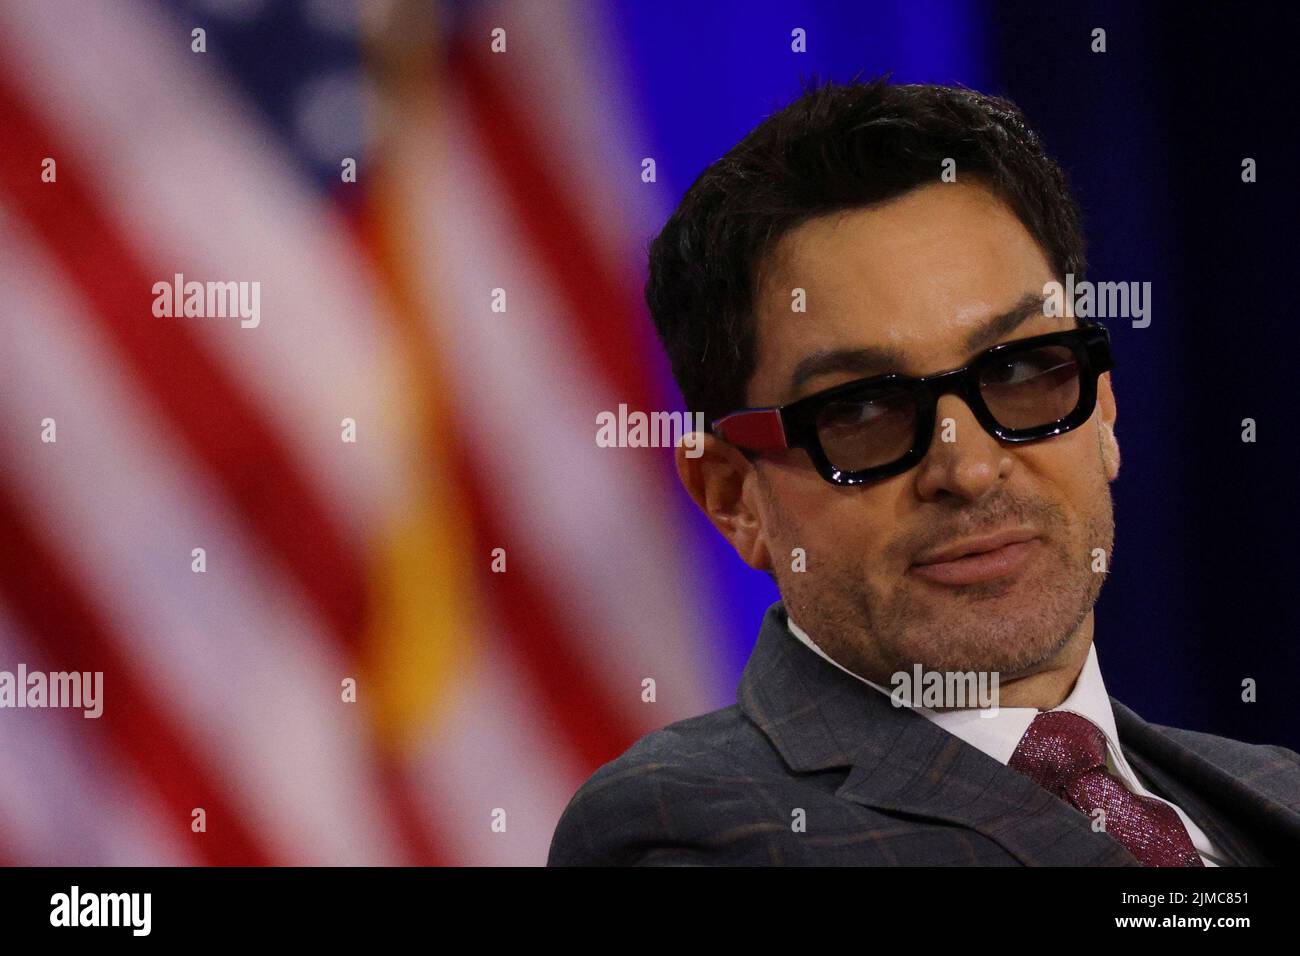 Brandon Straka, who was convicted on charges linked the January 6 attacks on the U.S. Capitol, speaks at the Conservative Political Action Conference (CPAC) in Dallas, Texas, U.S., August 5, 2022.  REUTERS/Brian Snyder Stock Photo